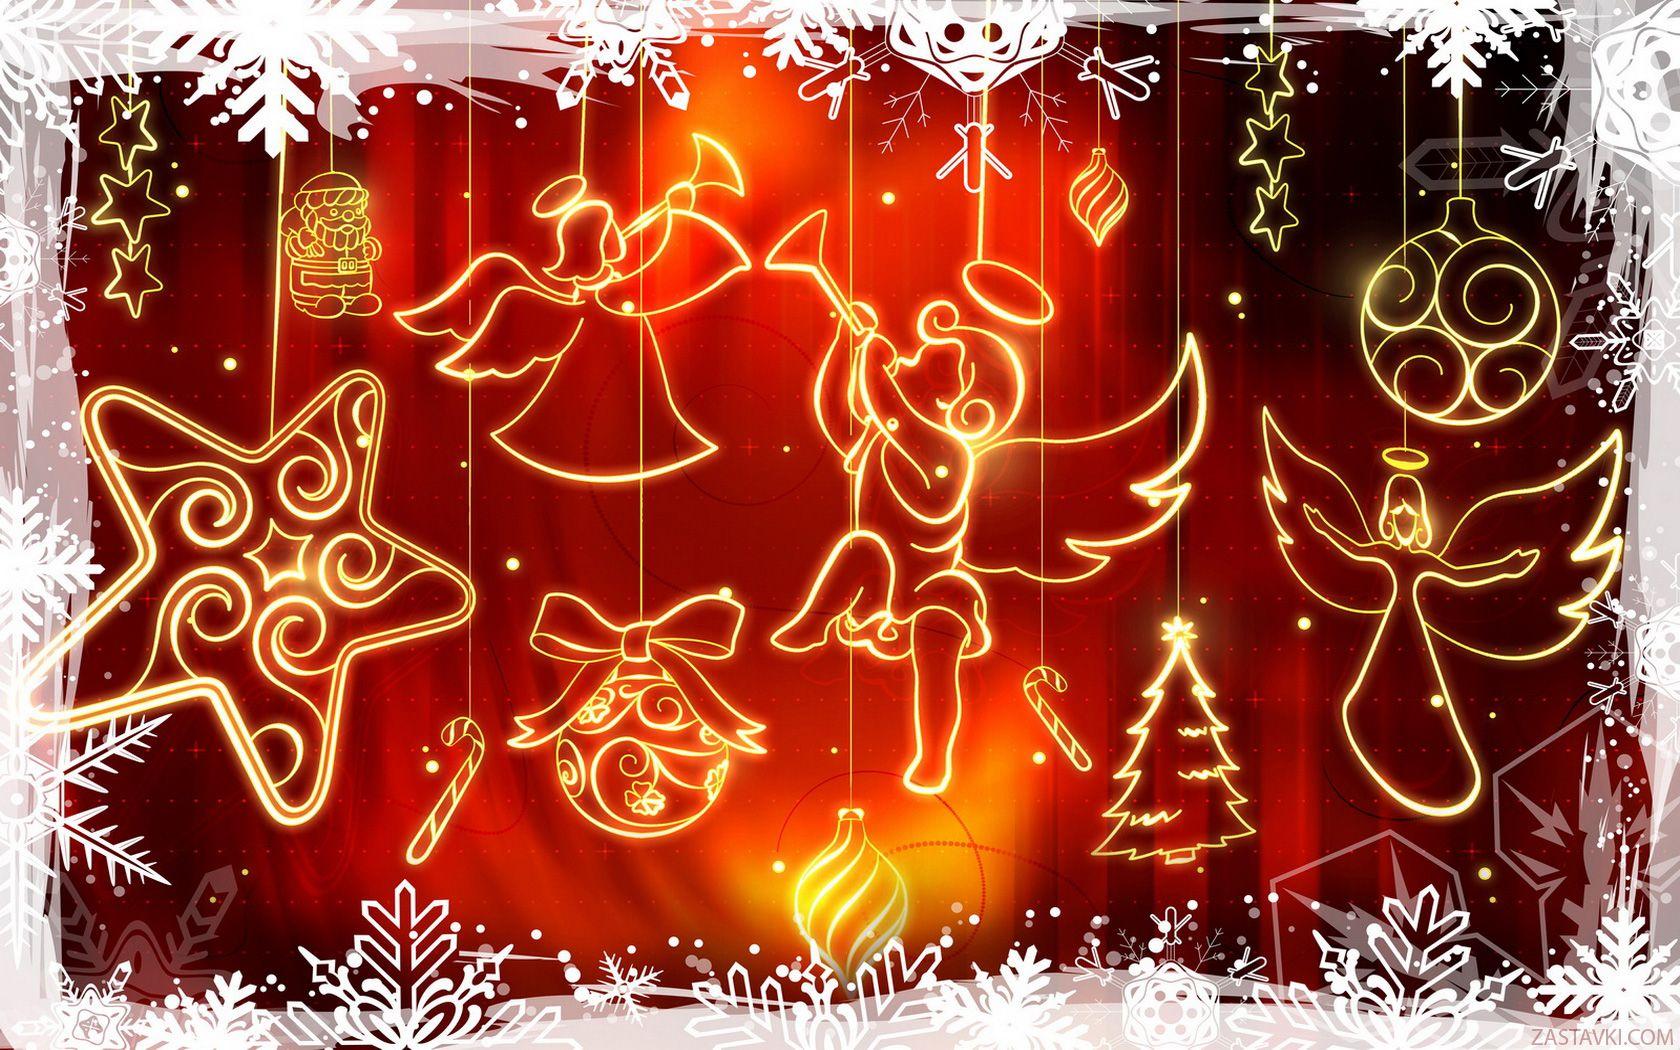 Christmas theme wallpaper and image, picture, photo